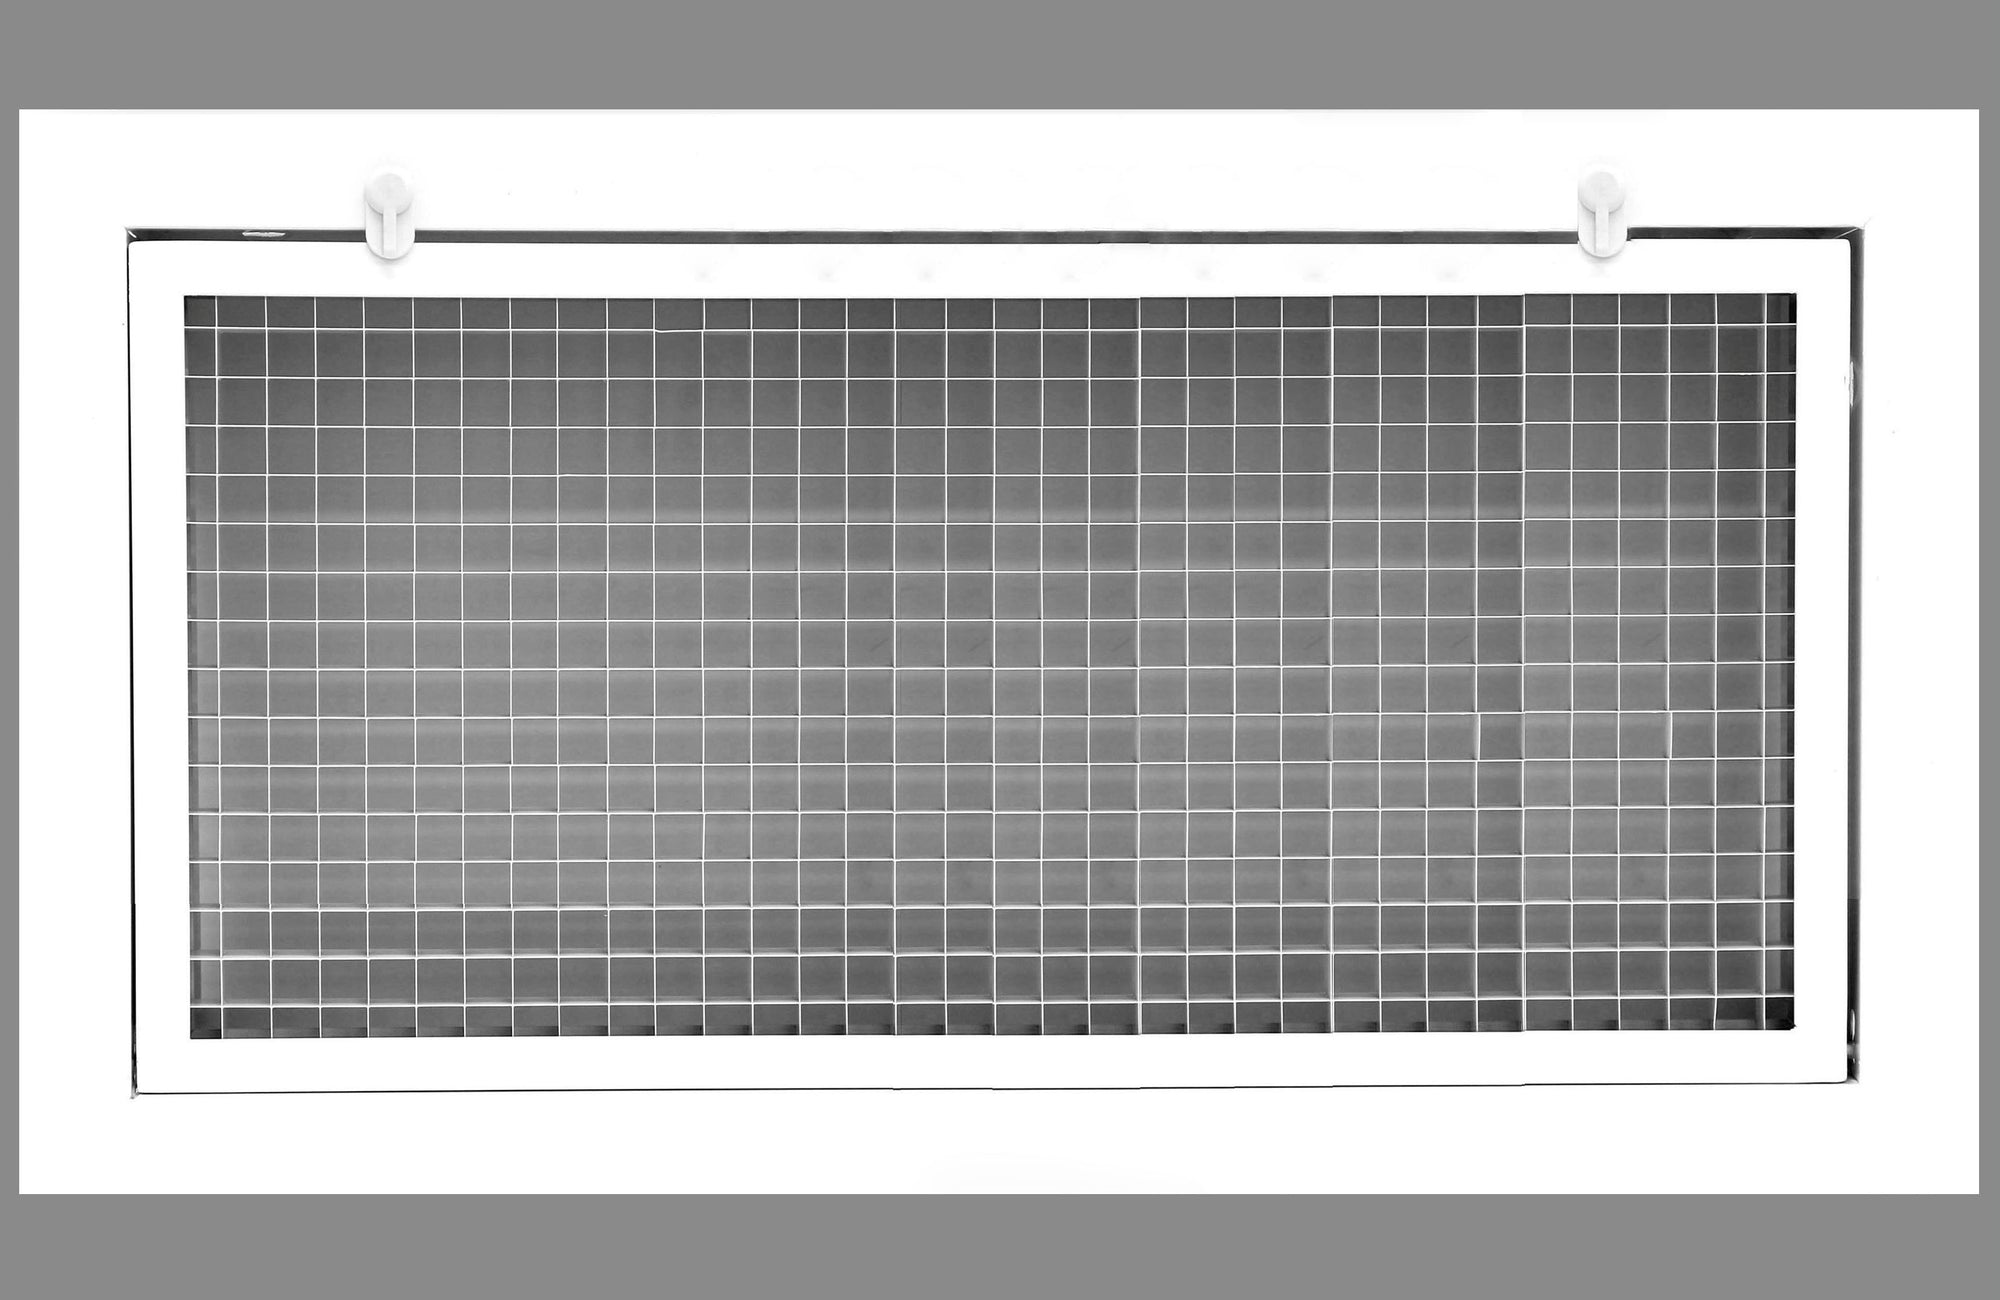 24" x 10" Cube Core Eggcrate Return Air Filter Grille for 1" Filter